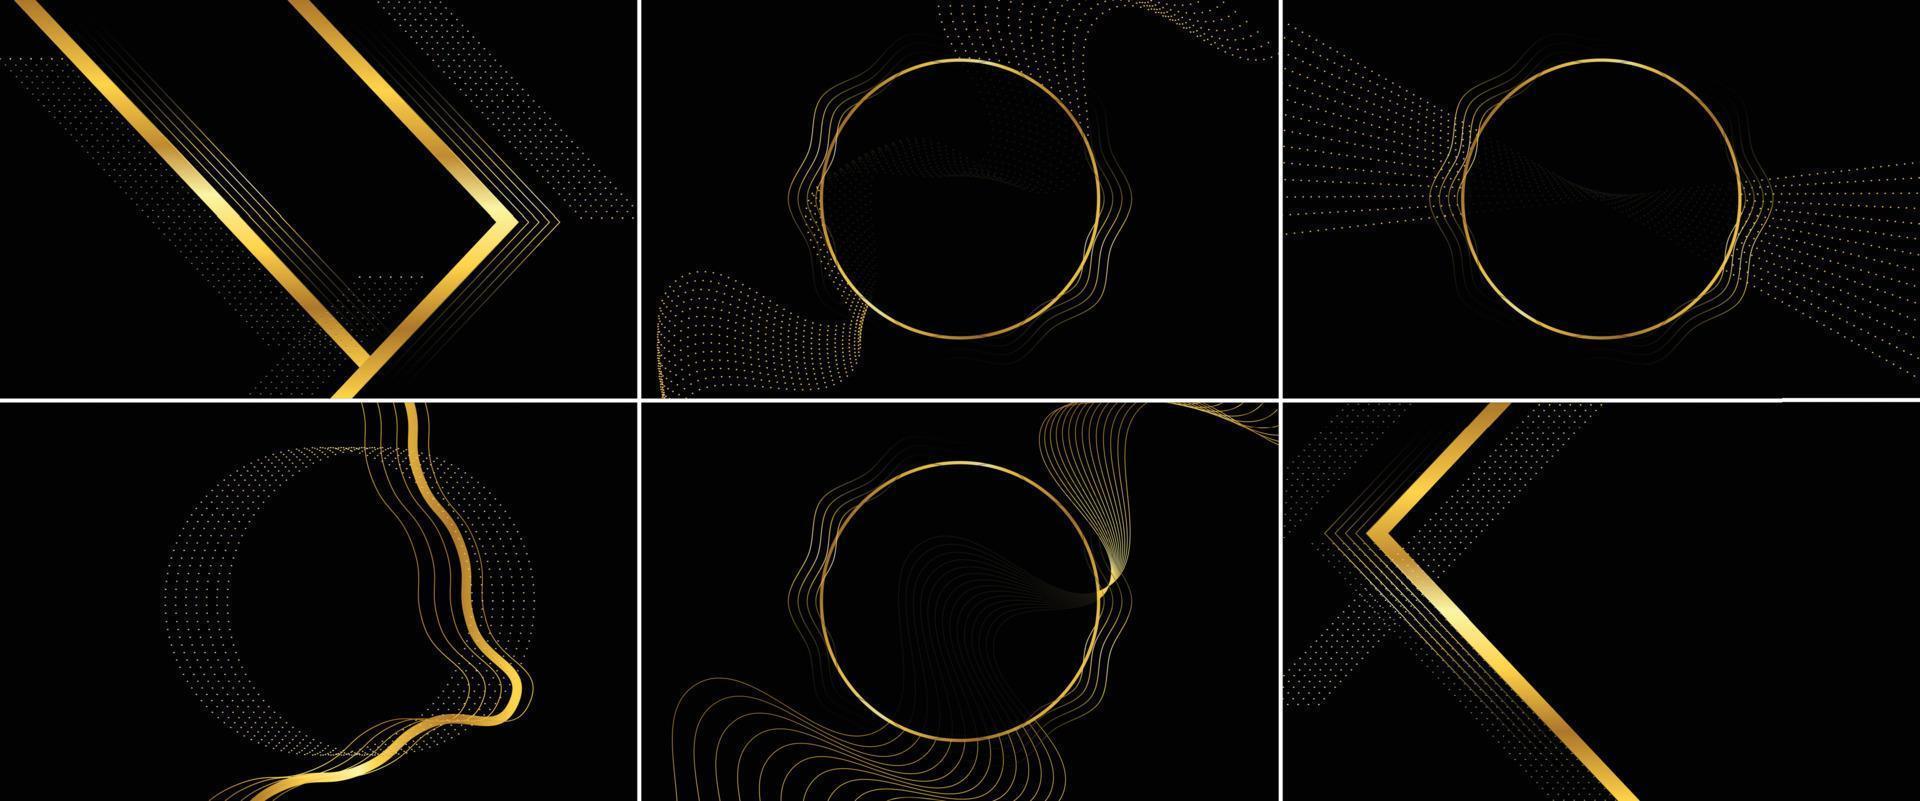 Black and gold gradient with a mosaic pattern vector